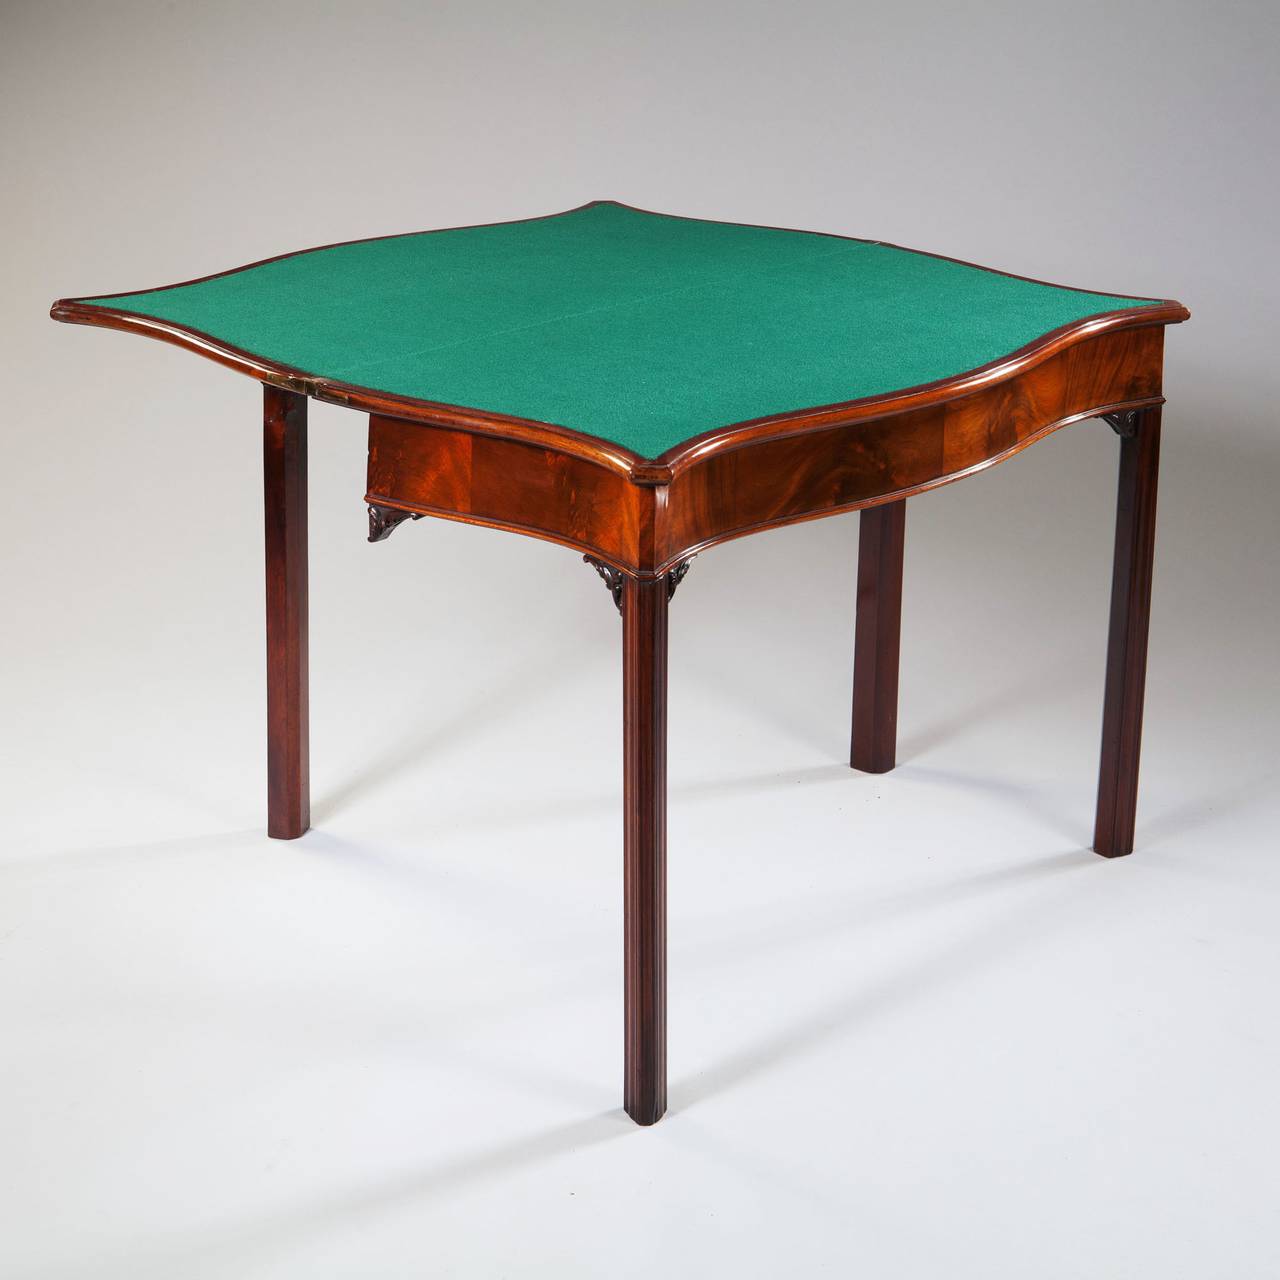 A George III Period mahogany card table, the finely figured flame veneered top of serpentine form, fitted with green baize playing surface, the chamfered square legs headed with carved rococo brackets.